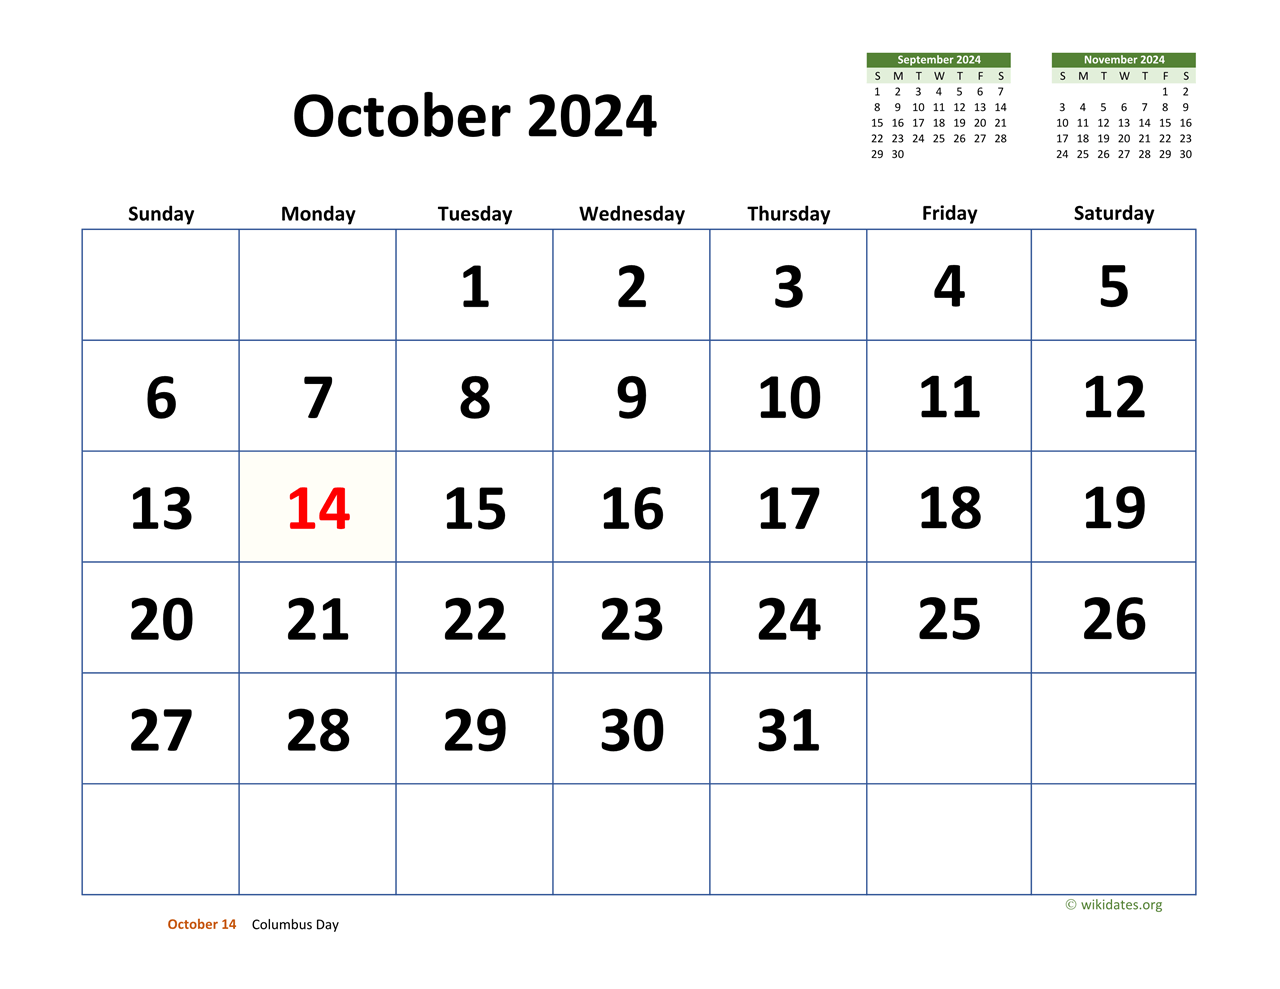 October 2024 Calendar with Extralarge Dates